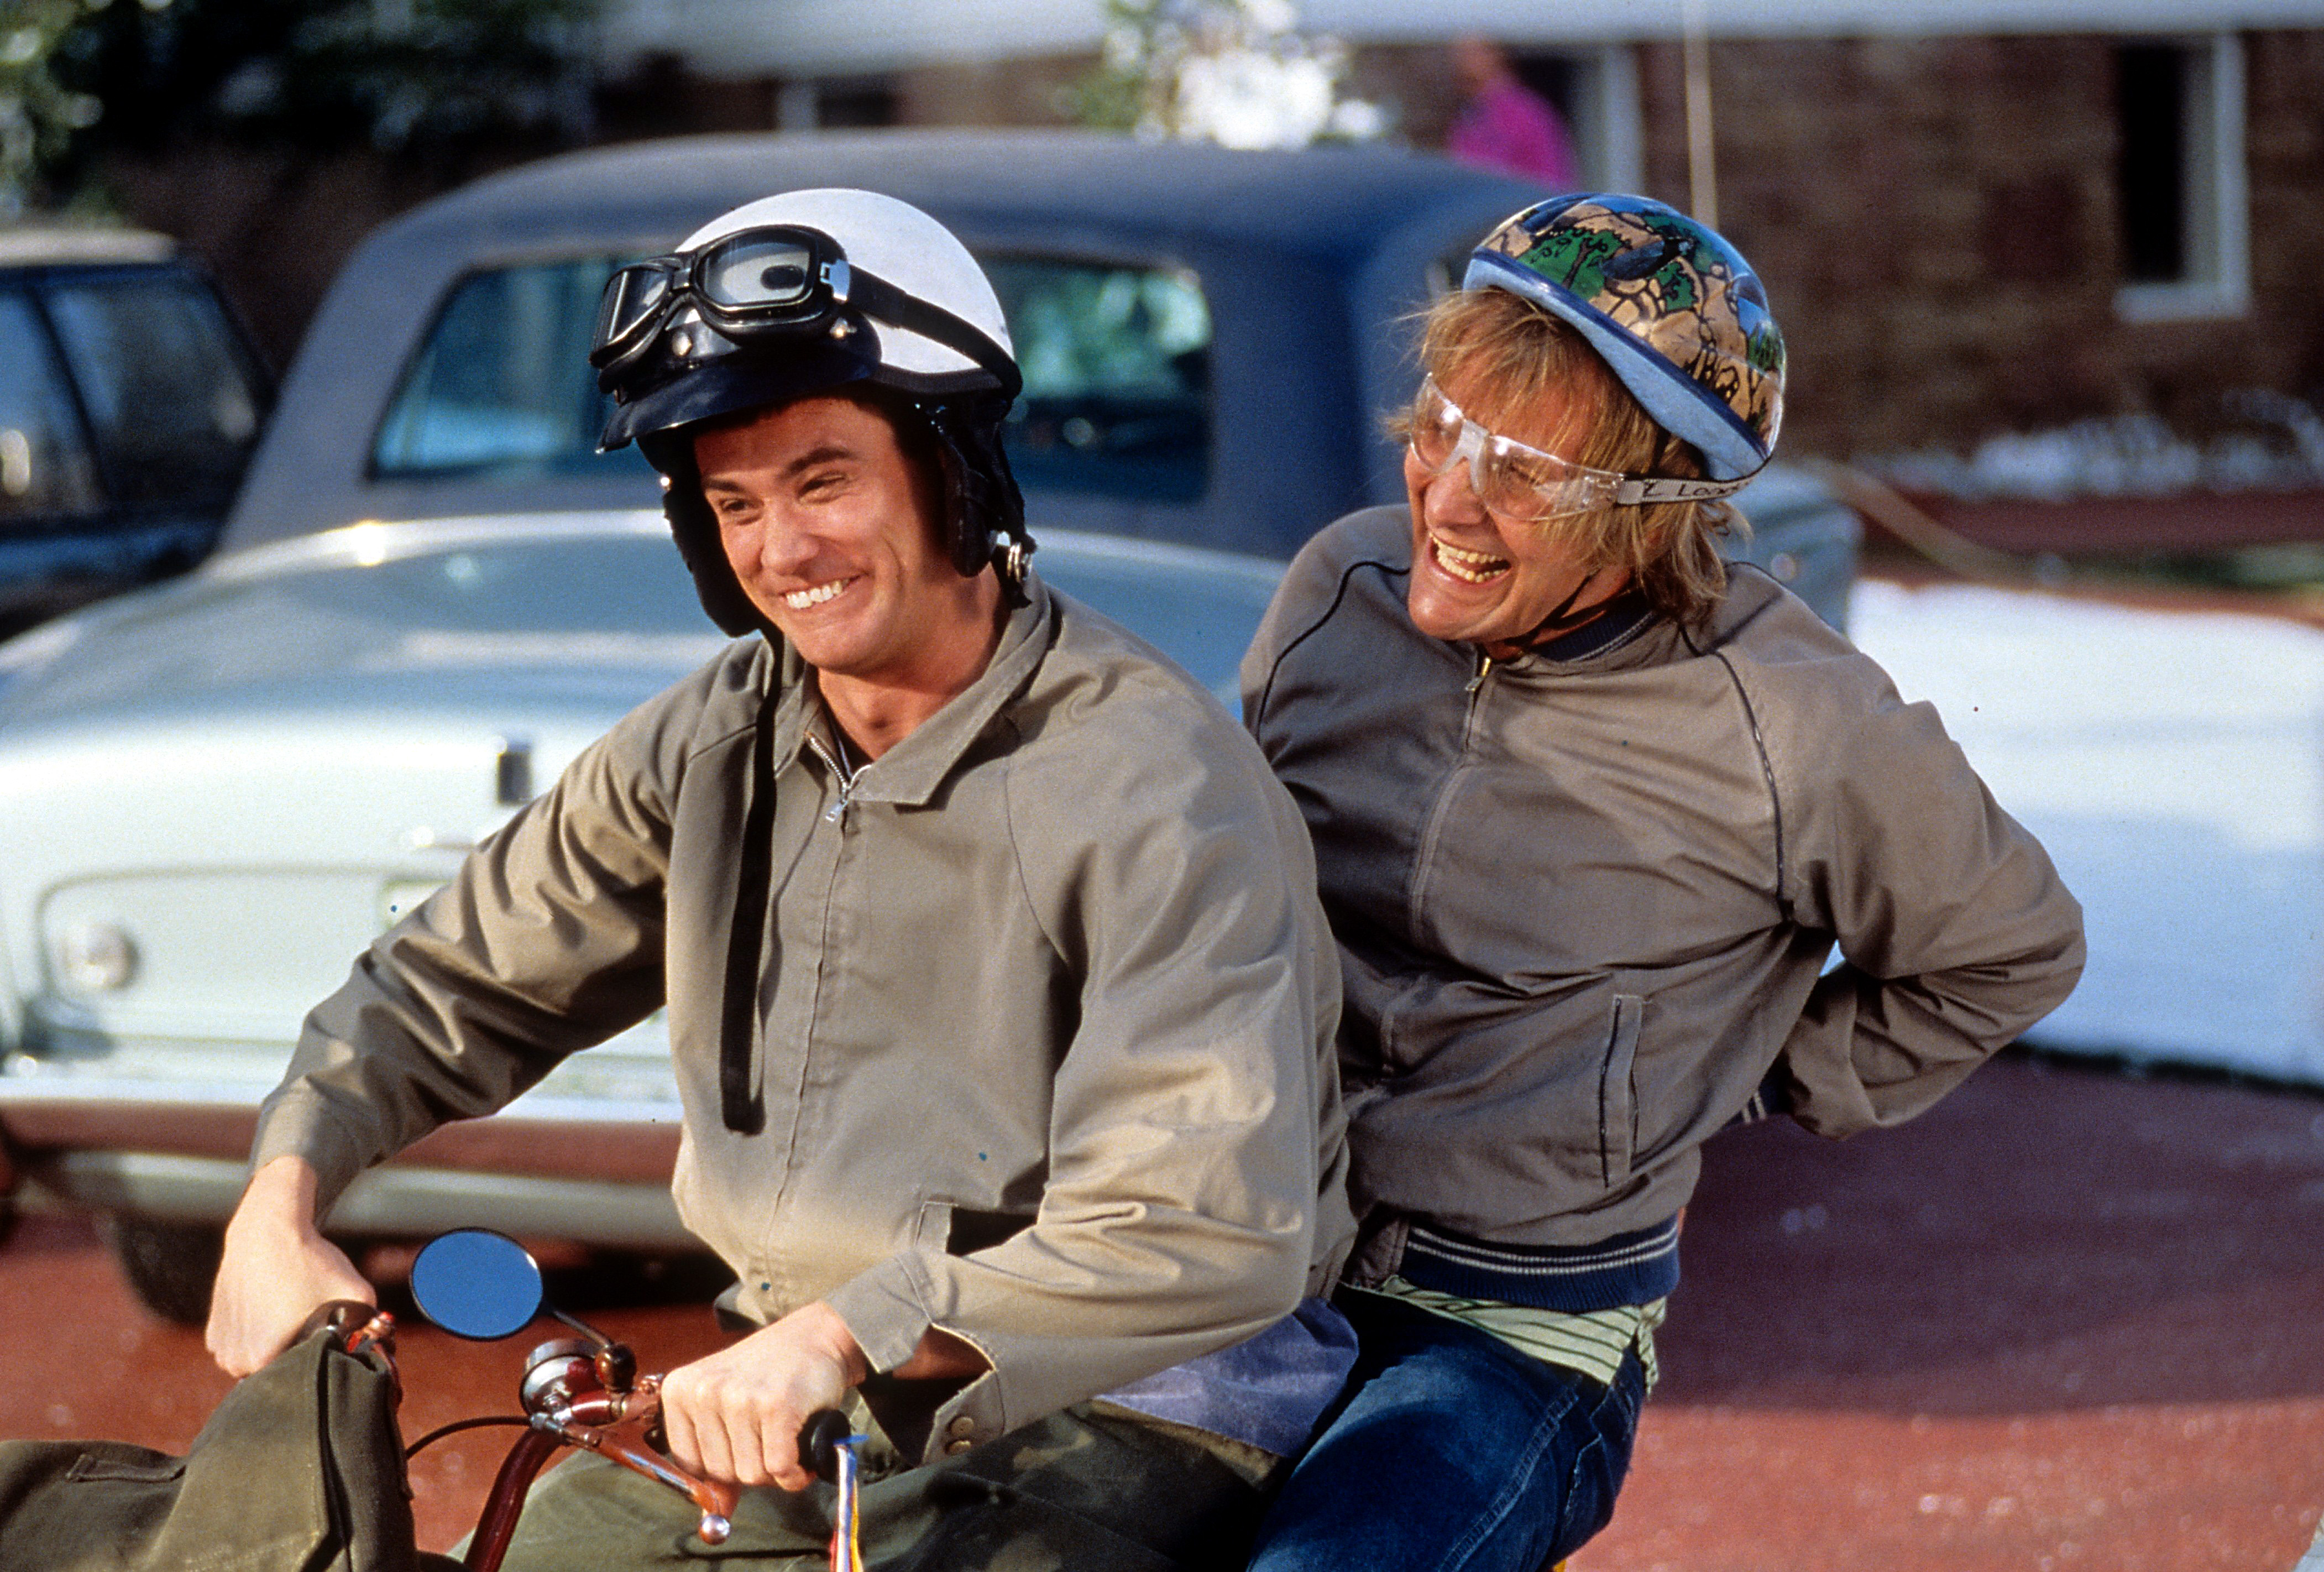 Jim Carrey and Jeff Daniels in 'Dumb &amp; Dumber', 1994. (Getty Images&mdash;2012 Getty Images)